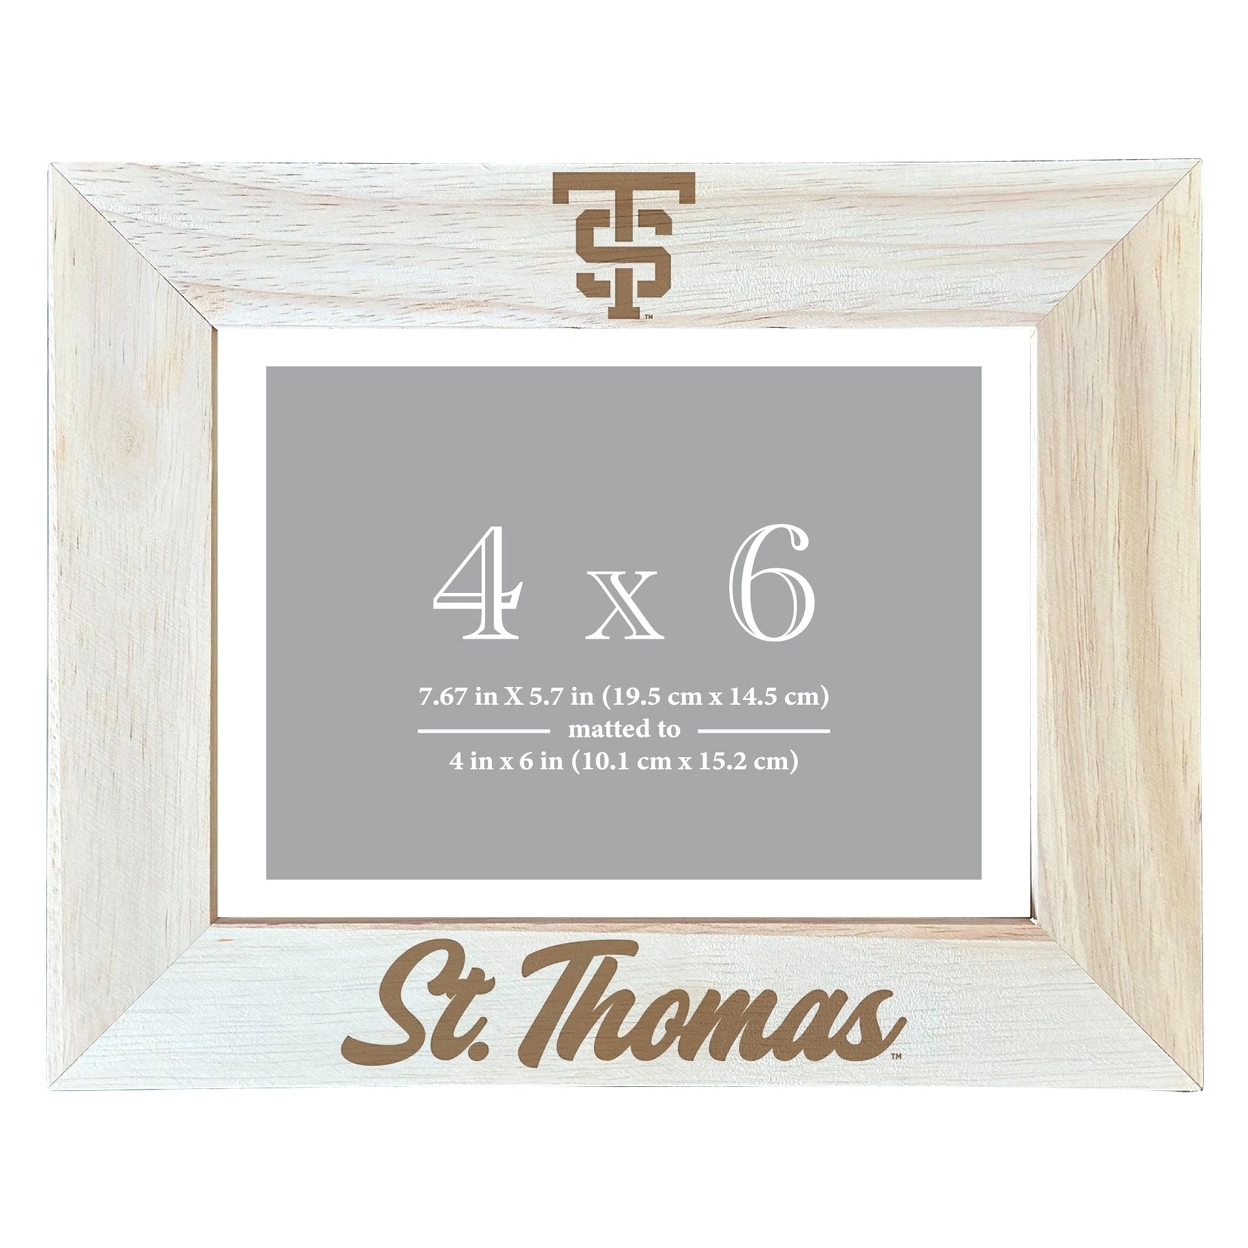 University Of St. Thomas Wooden Photo Frame Matted To 4 X 6 Inch - Etched